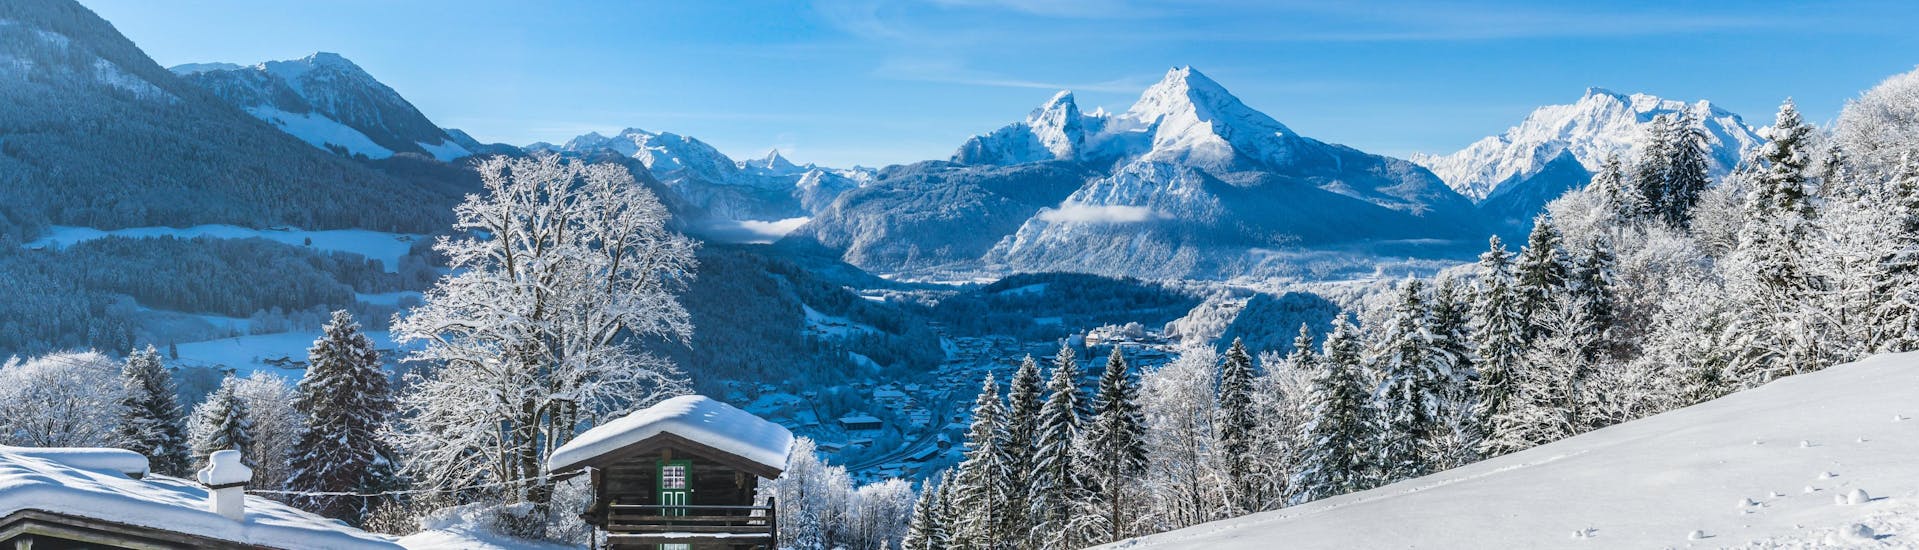 A view of the dreamly winter landscape of Ramsau - Hochschwarzeck in Berchtesgadener Land, a popular region in Germany where visitors can books ski lessons with one of the local ski schools.